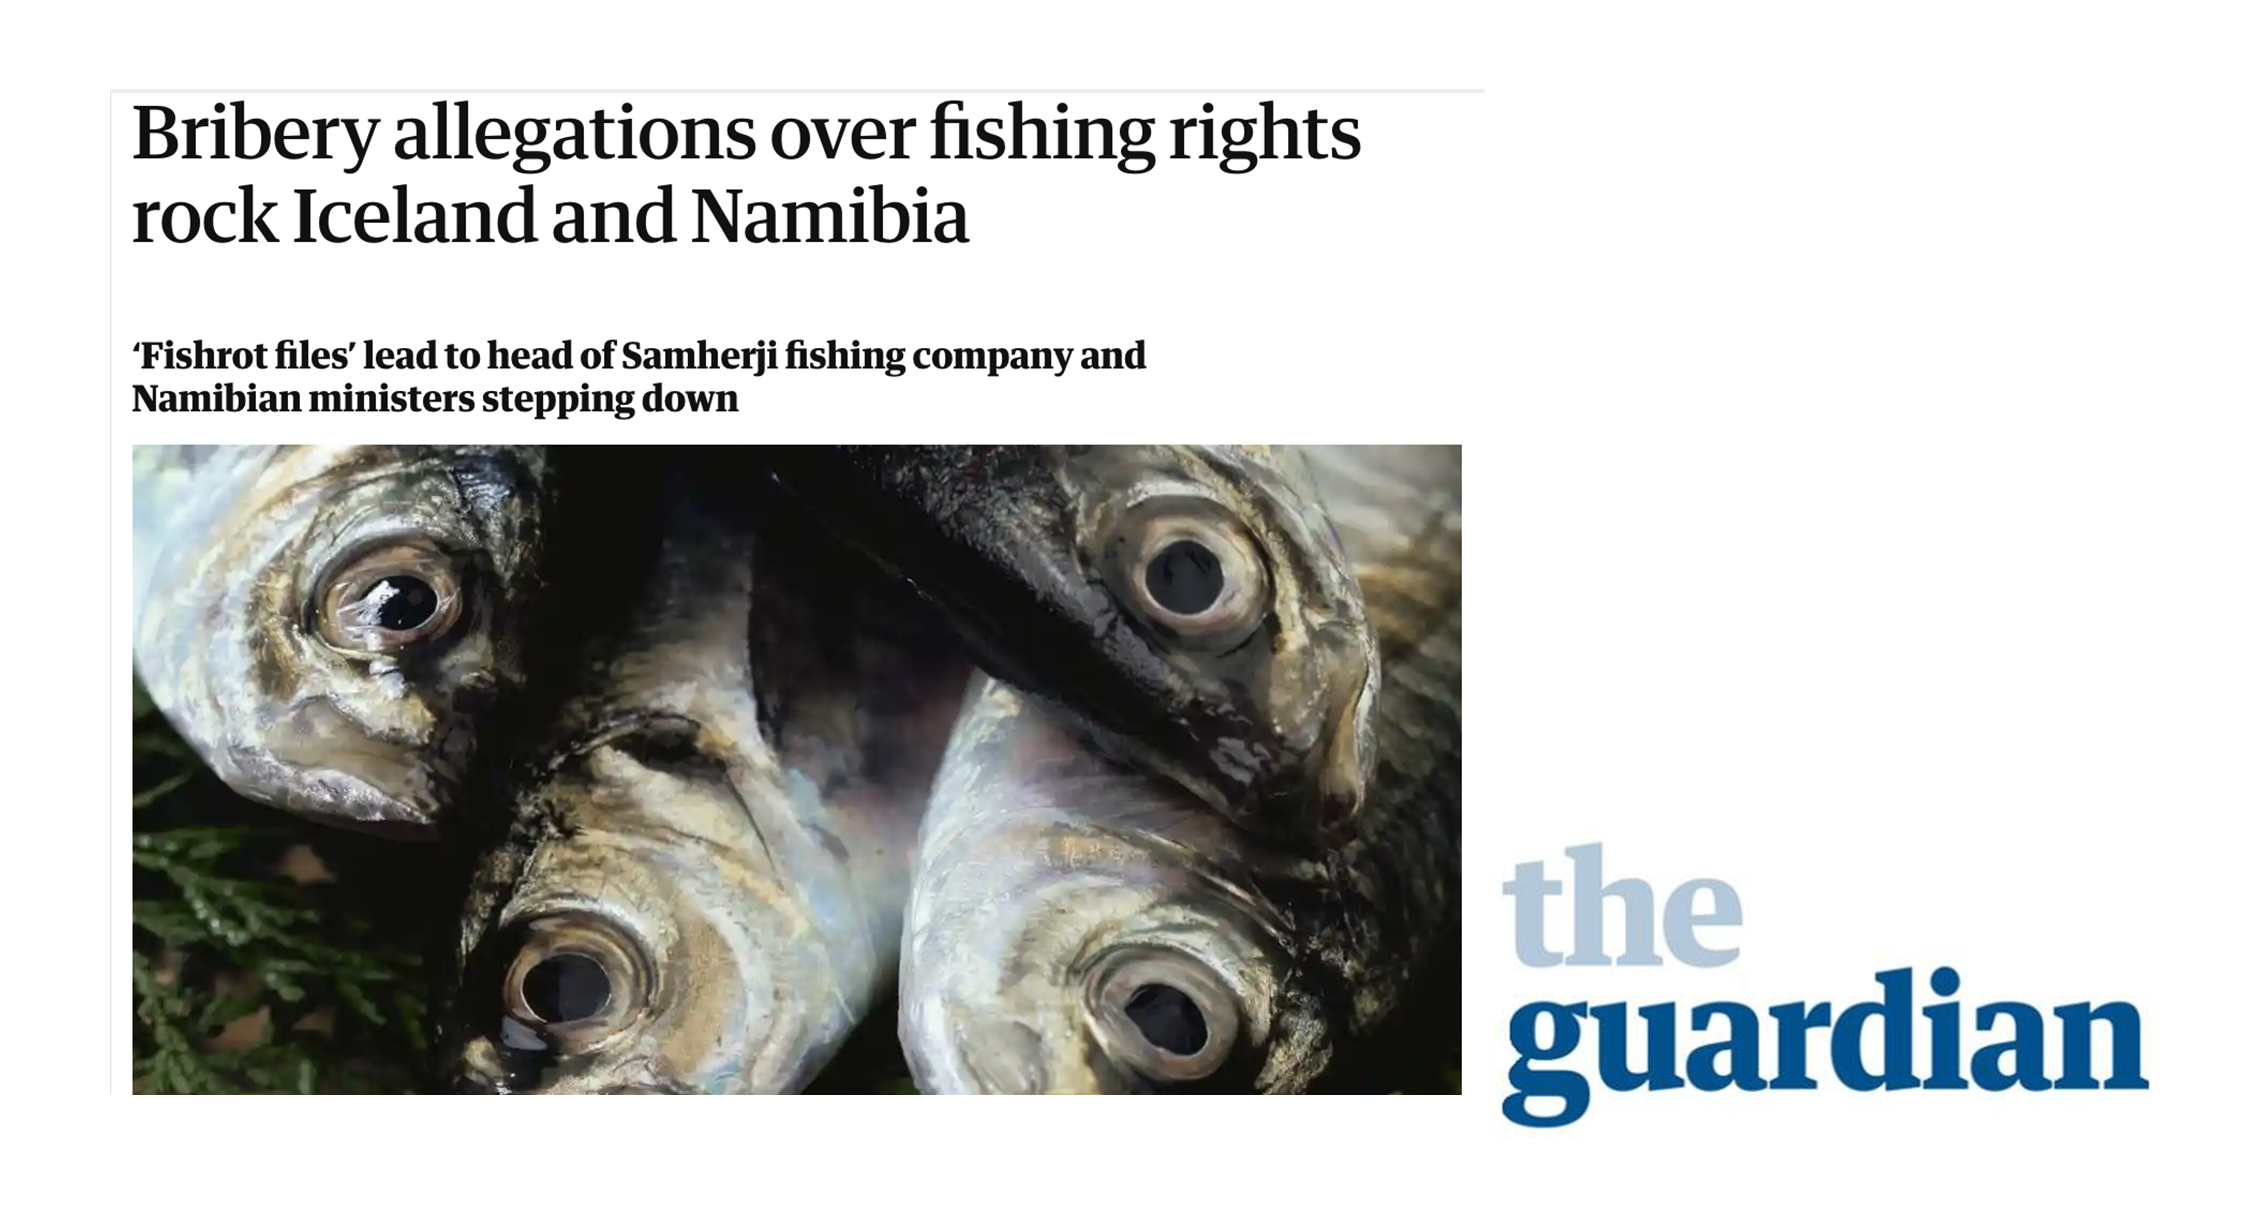 The Guardian: Bribery allegations rock Iceland and Namibia